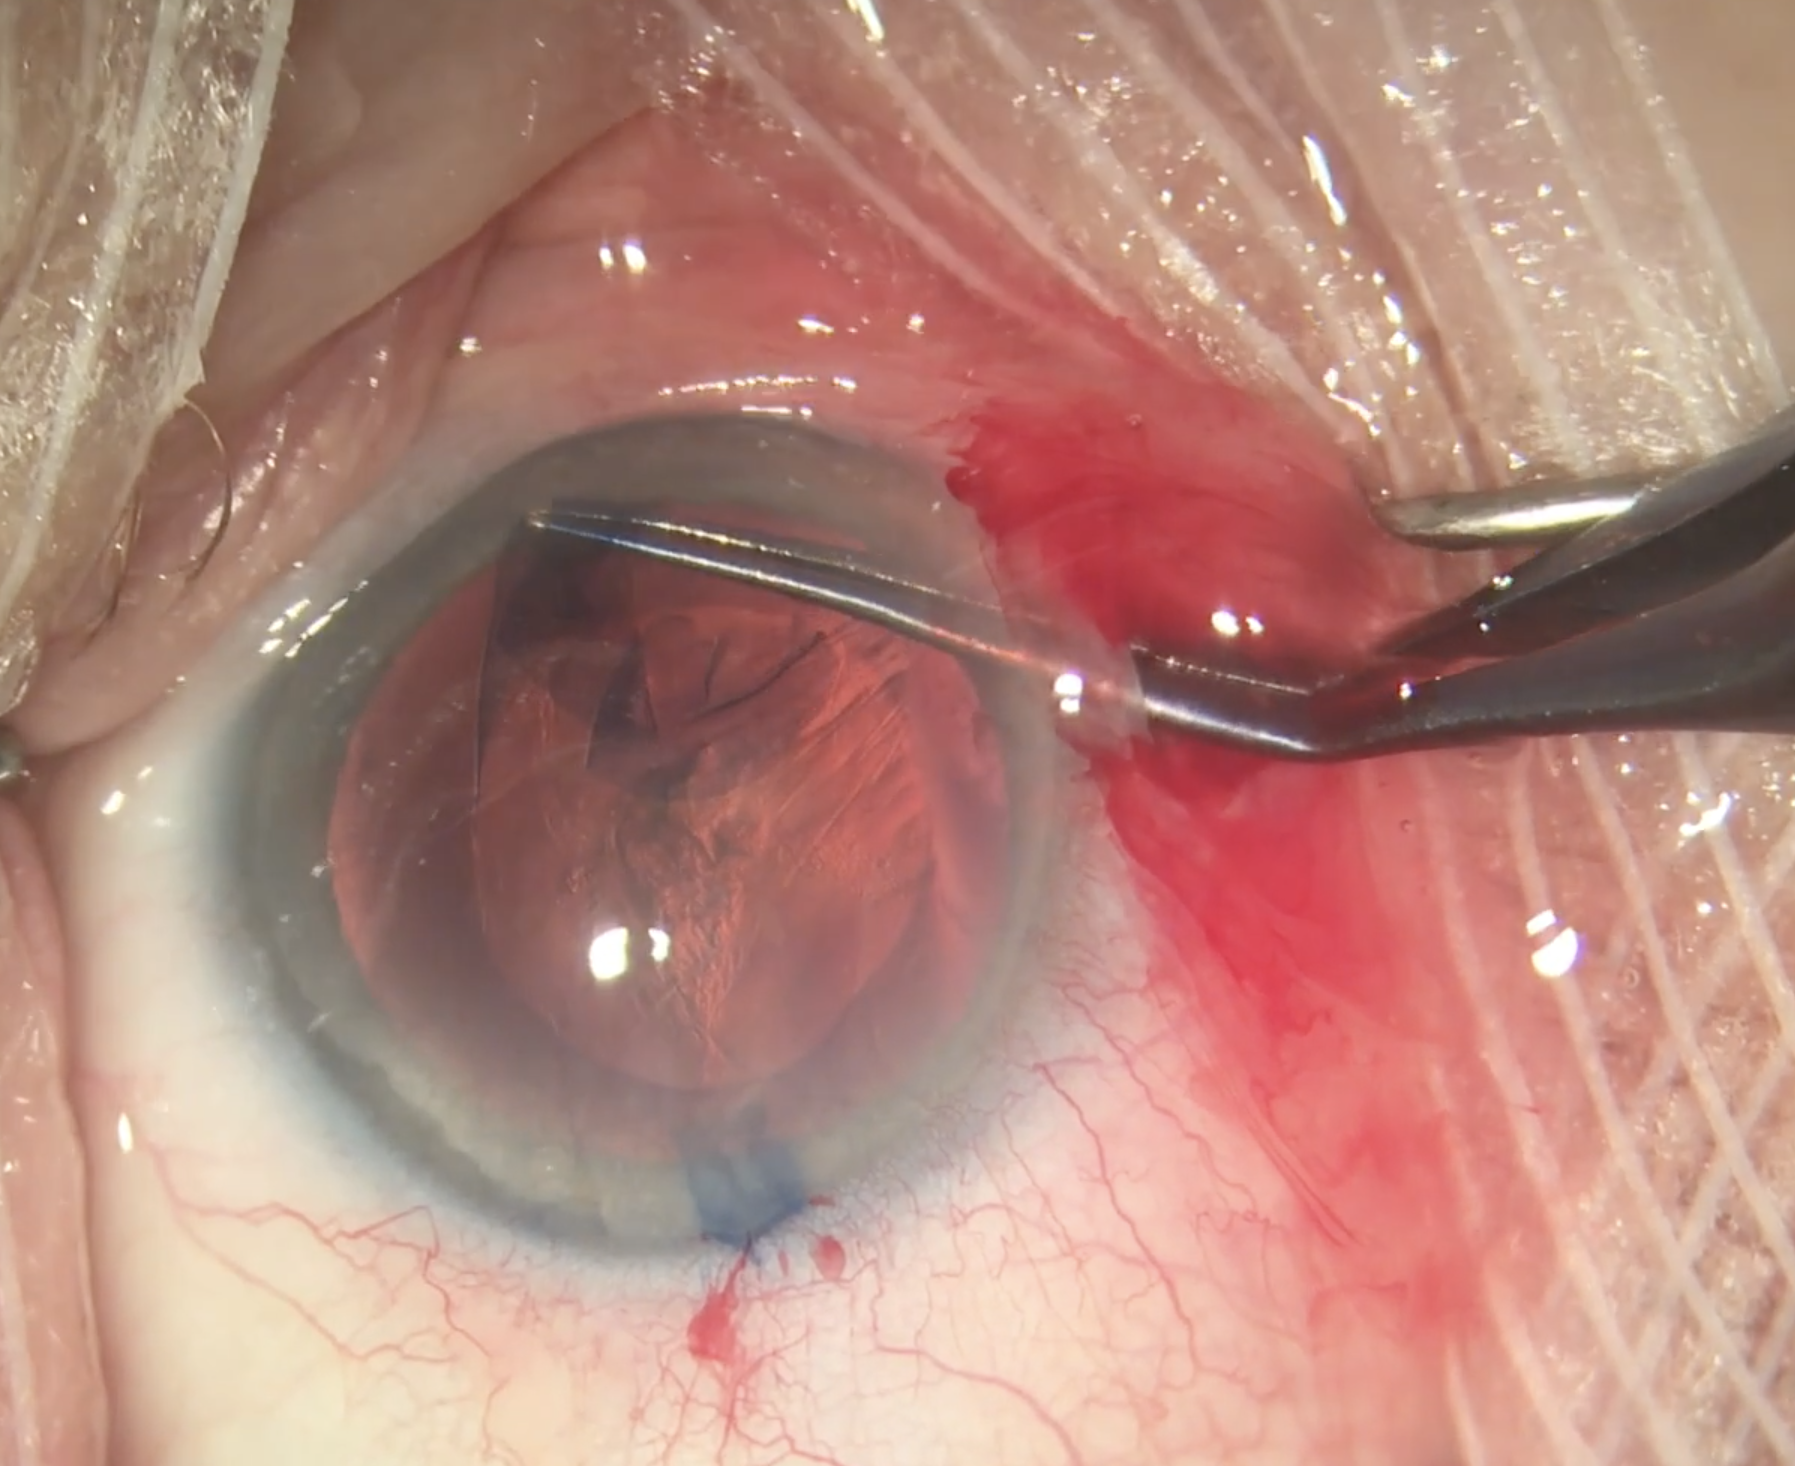 The coming deluge of cataract patients in need of surgery could be stemmed by policy changes in the US that would allow for both eyes to be operated on in the same session. Studies continue to find the procedure safe.